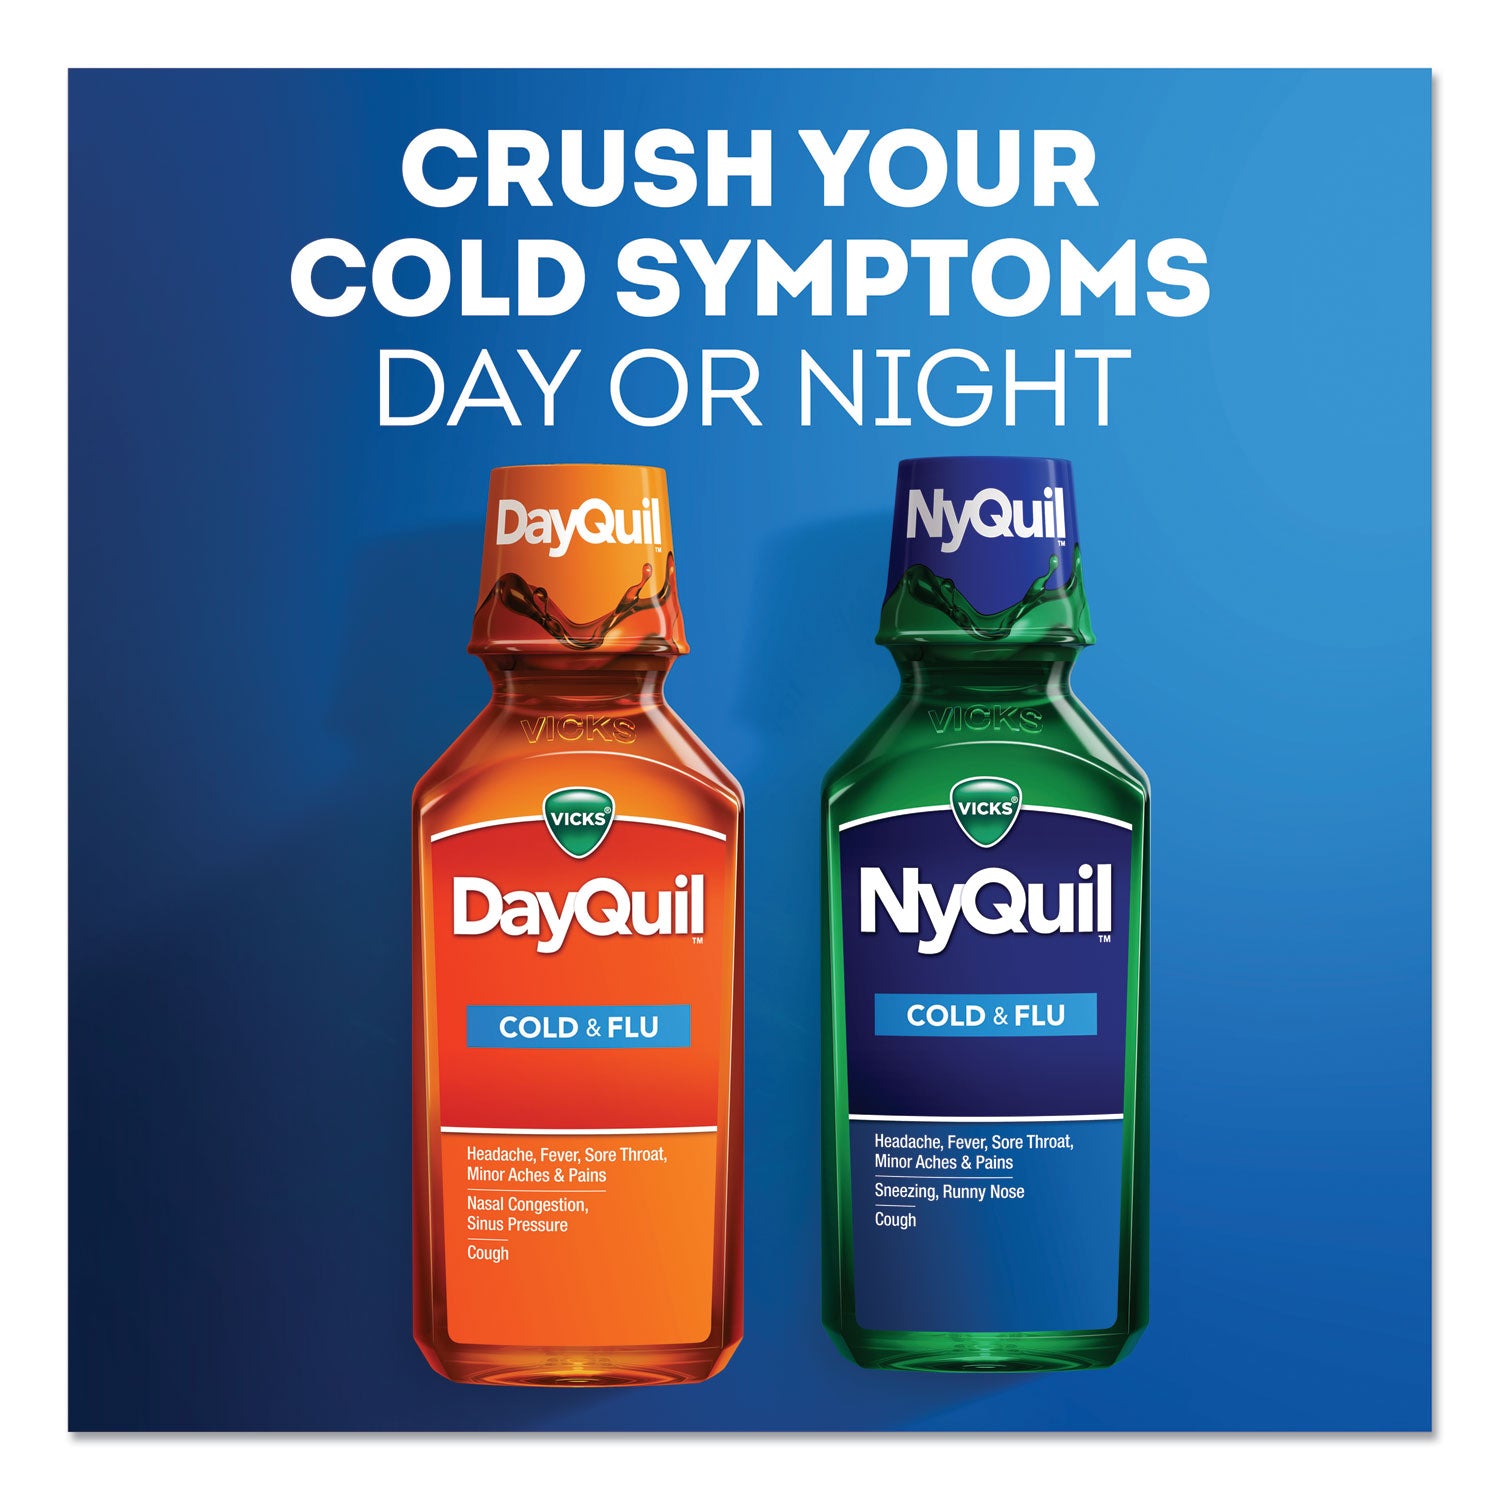 nyquil-cold-and-flu-nighttime-liquid-12-oz-bottle_pgc01426ea - 8